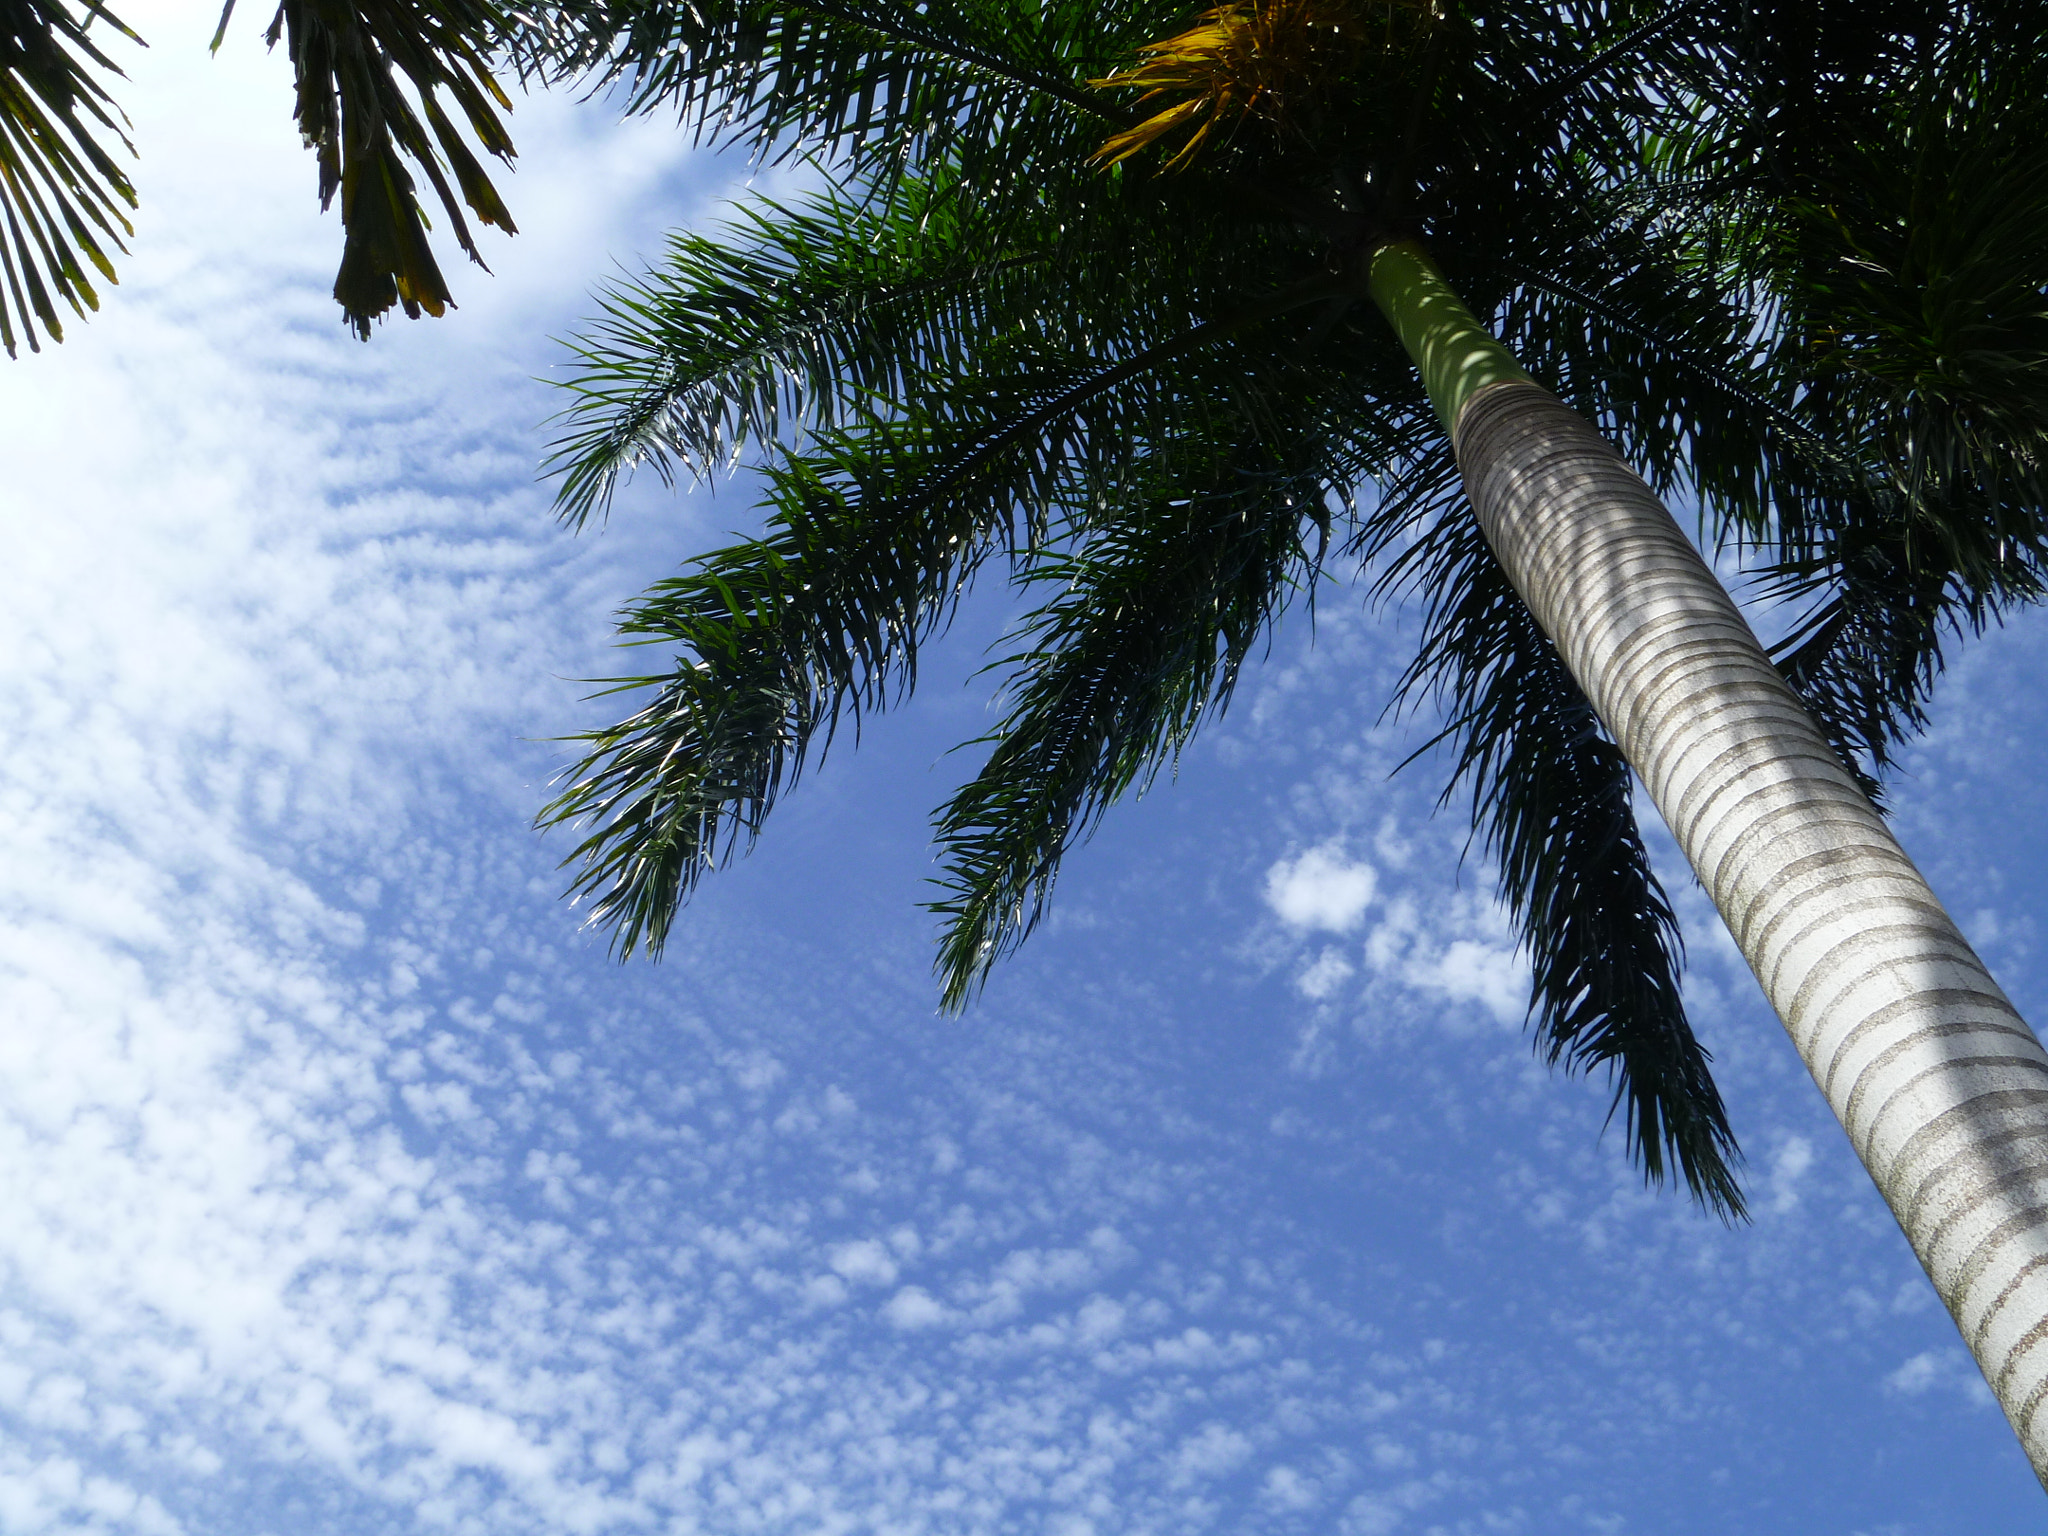 Panasonic DMC-TS10 sample photo. Looking at the sky from under the palm tree photography